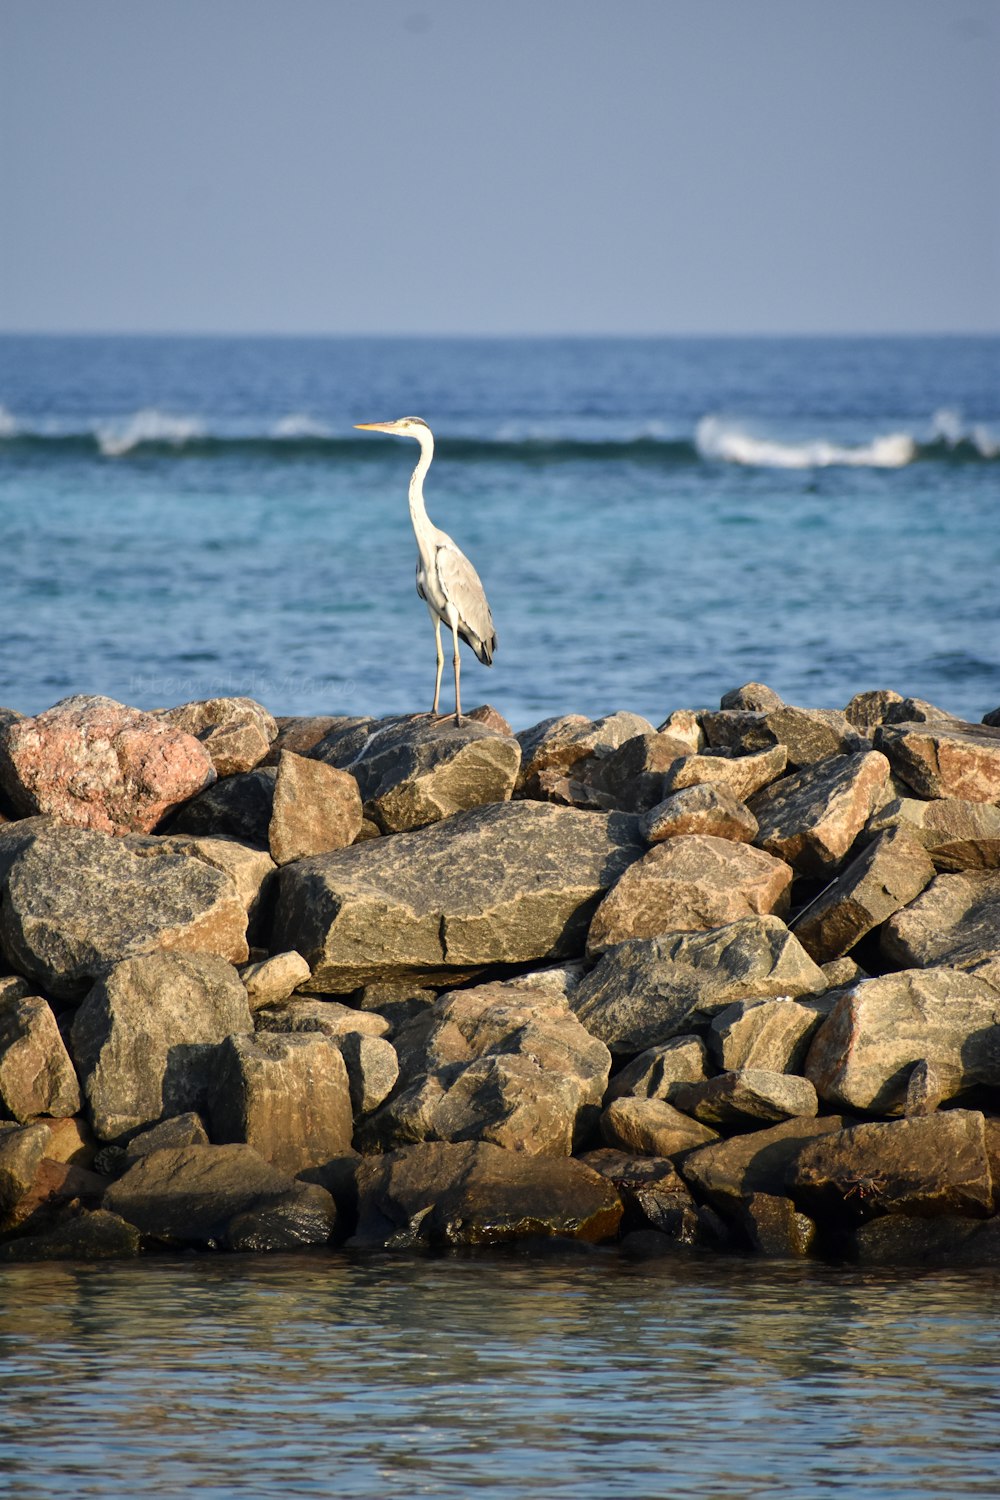 a white bird standing on a pile of rocks near the ocean